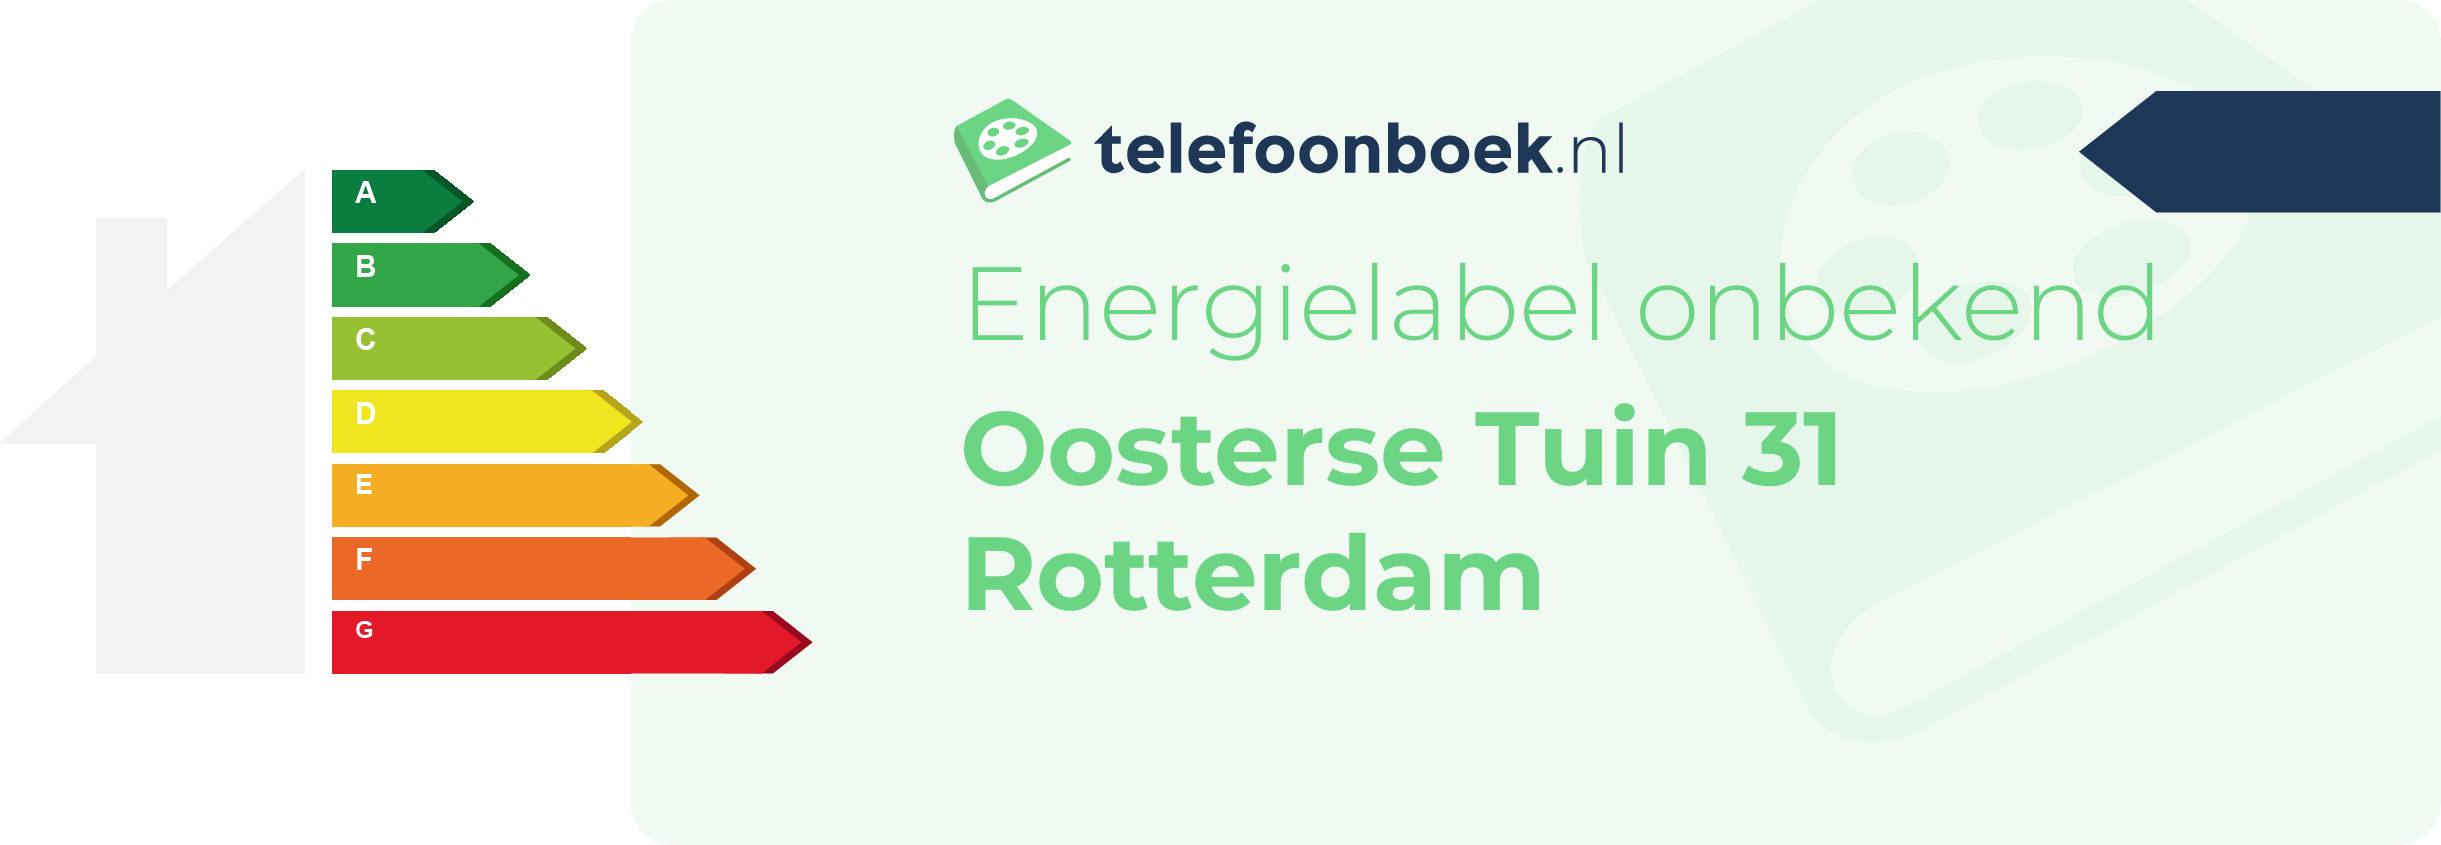 Energielabel Oosterse Tuin 31 Rotterdam